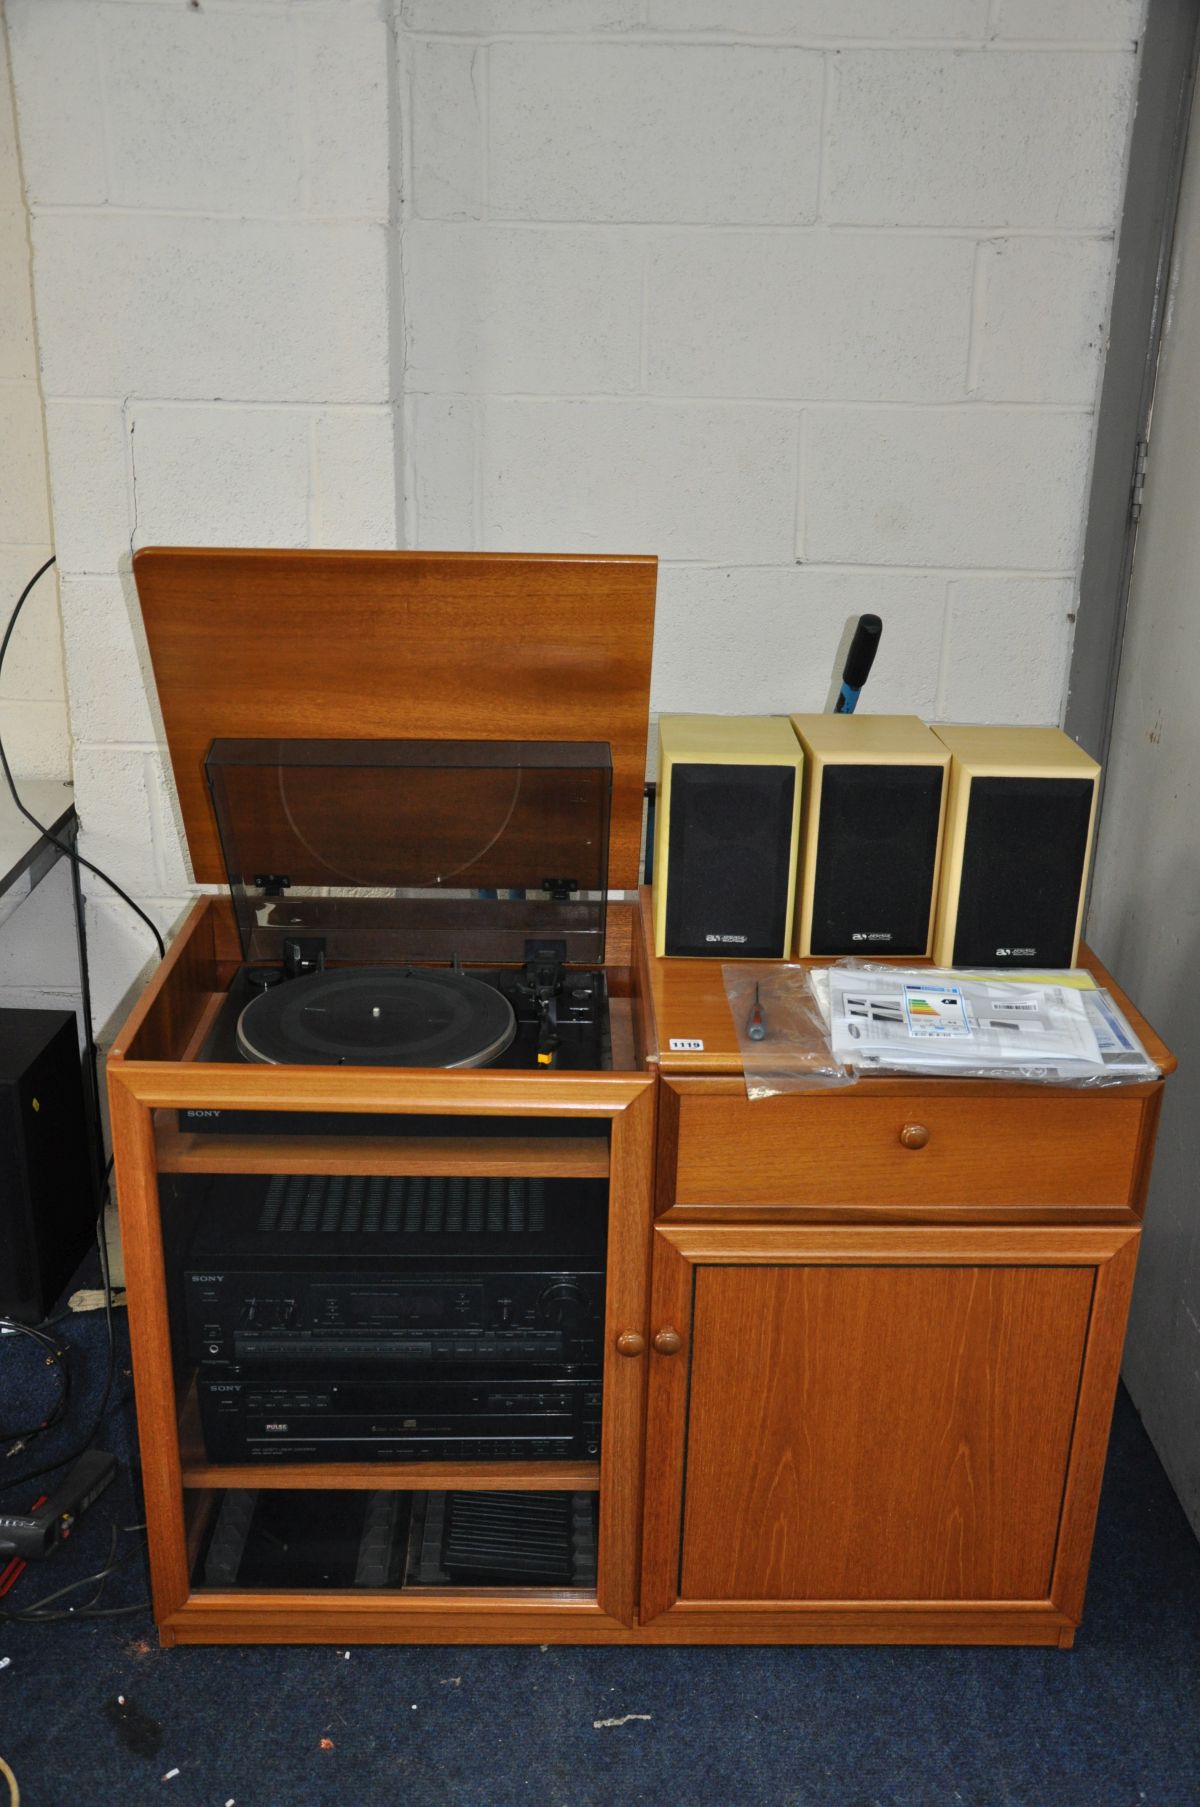 A SONY COMPONANT HI FI in a teak cabinet, including a Sony CDP-C425 5 disc CD player, a STR-D590